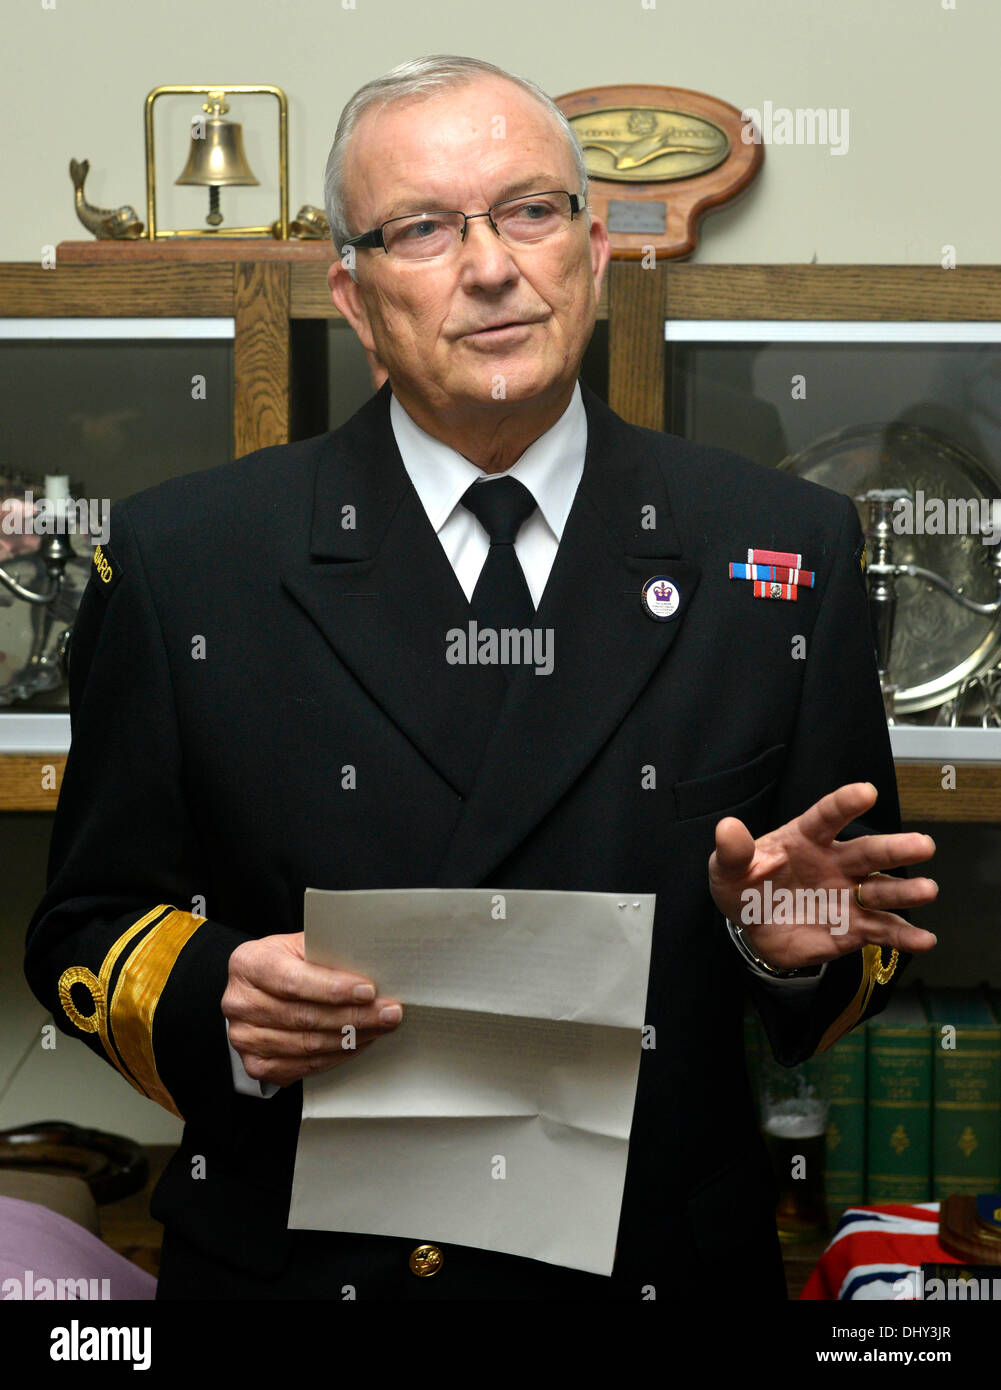 The Acting Chief Coastguard Officer for the UK Richard Martin who has taken over command of the the British Maritime Coastguard Agency, Britain, UK Stock Photo